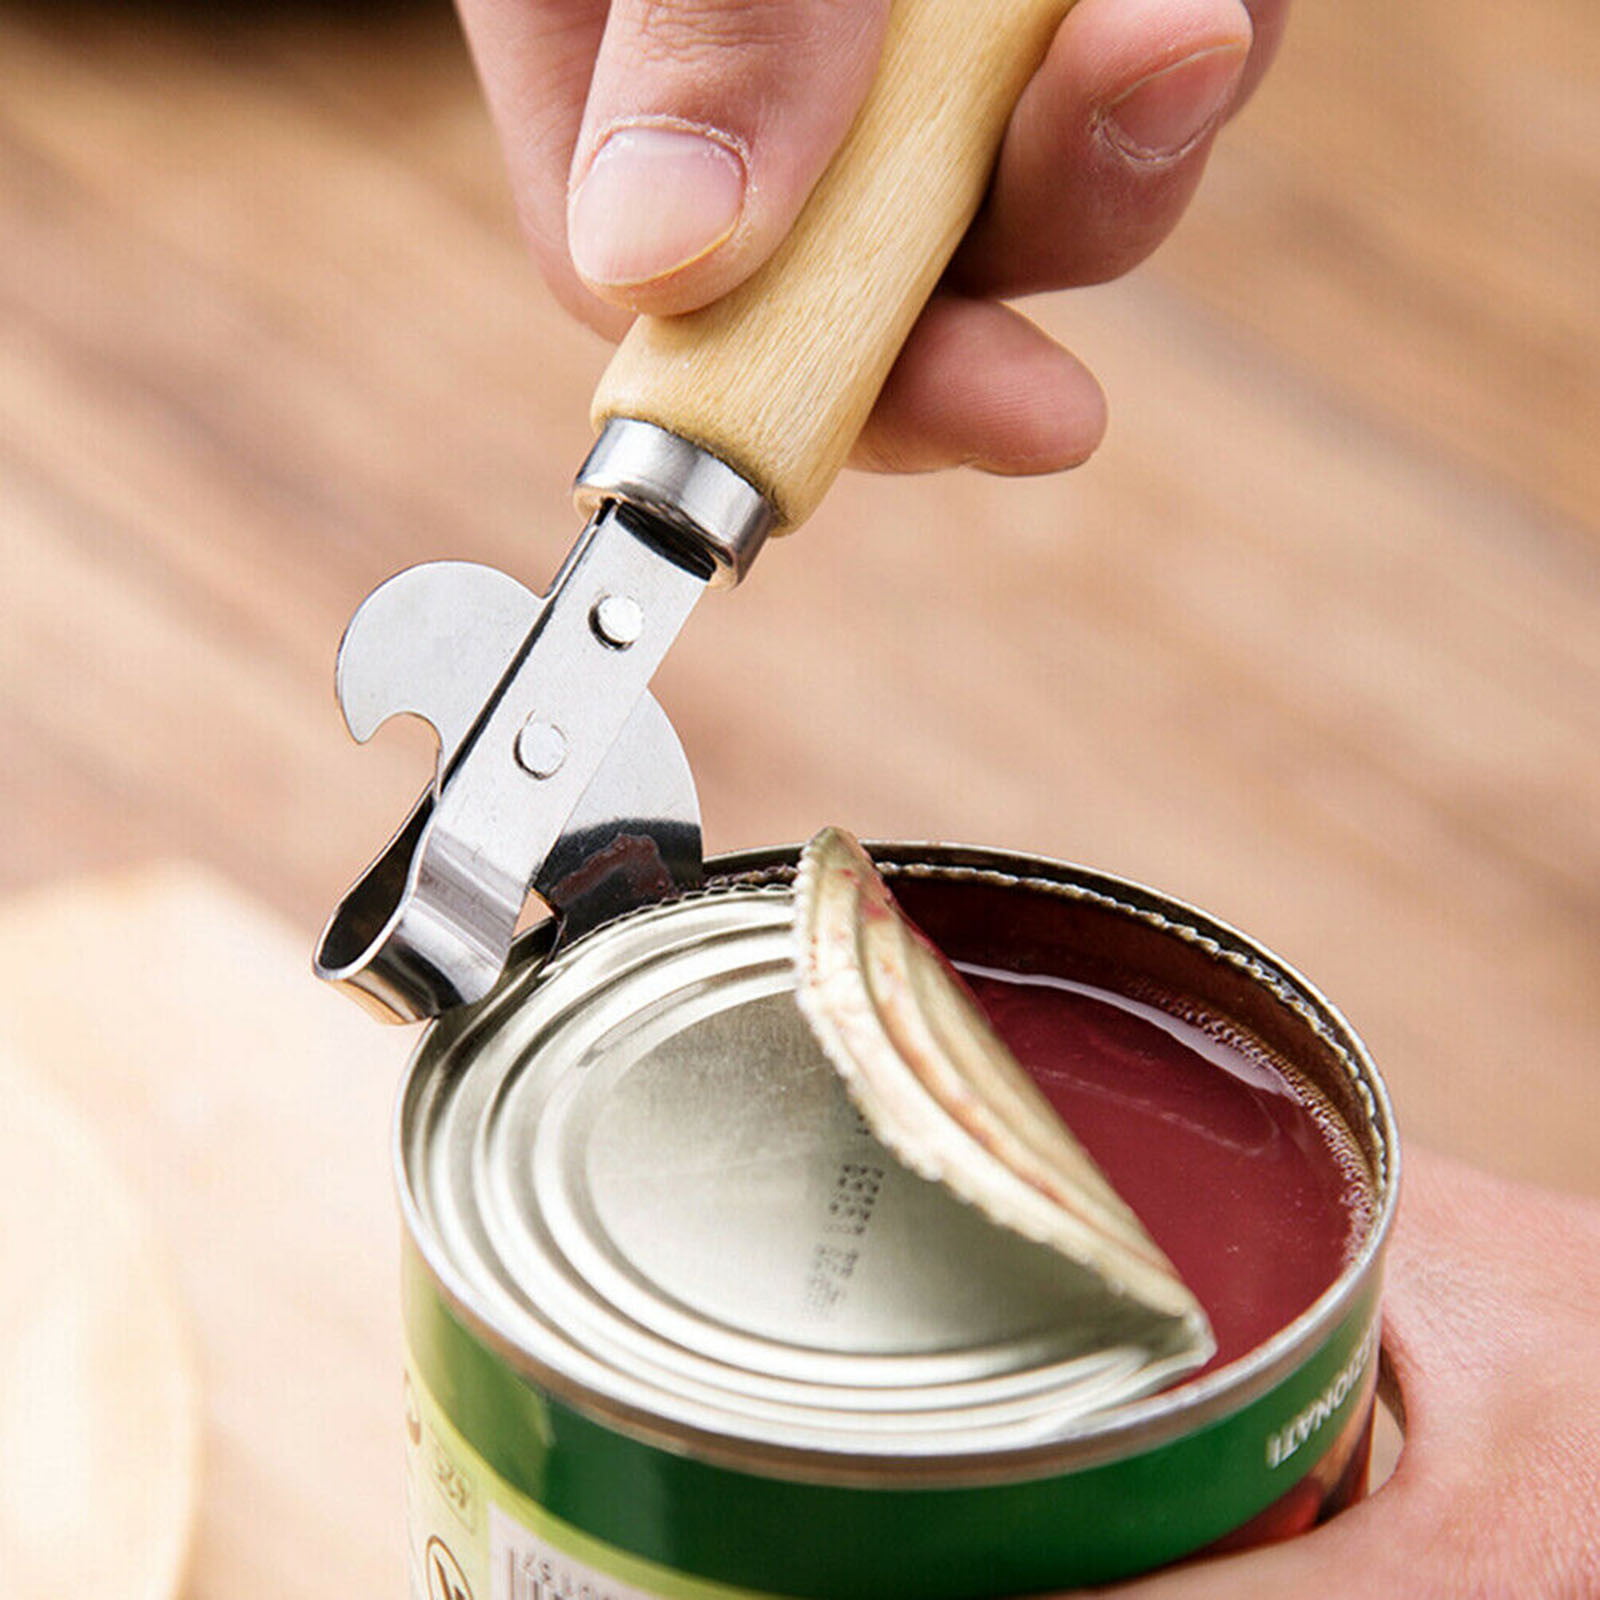 Easy Turn® Can Openers